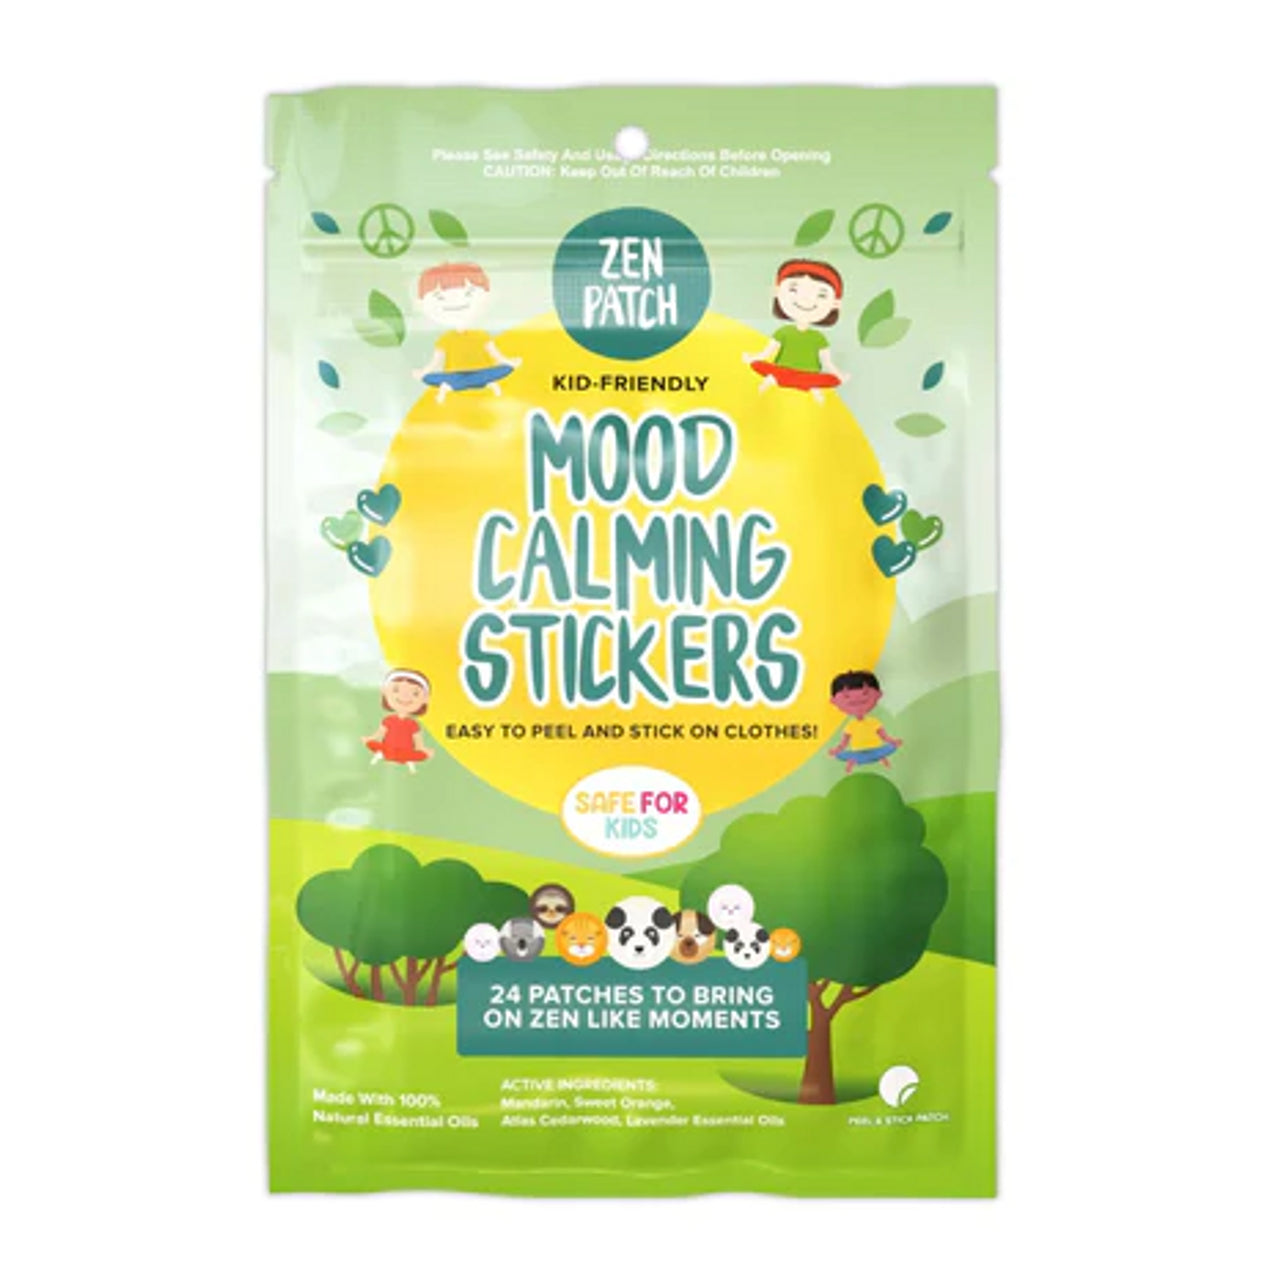 The Natural Patch Co. Zen Patch (Mood Calming Stickers)